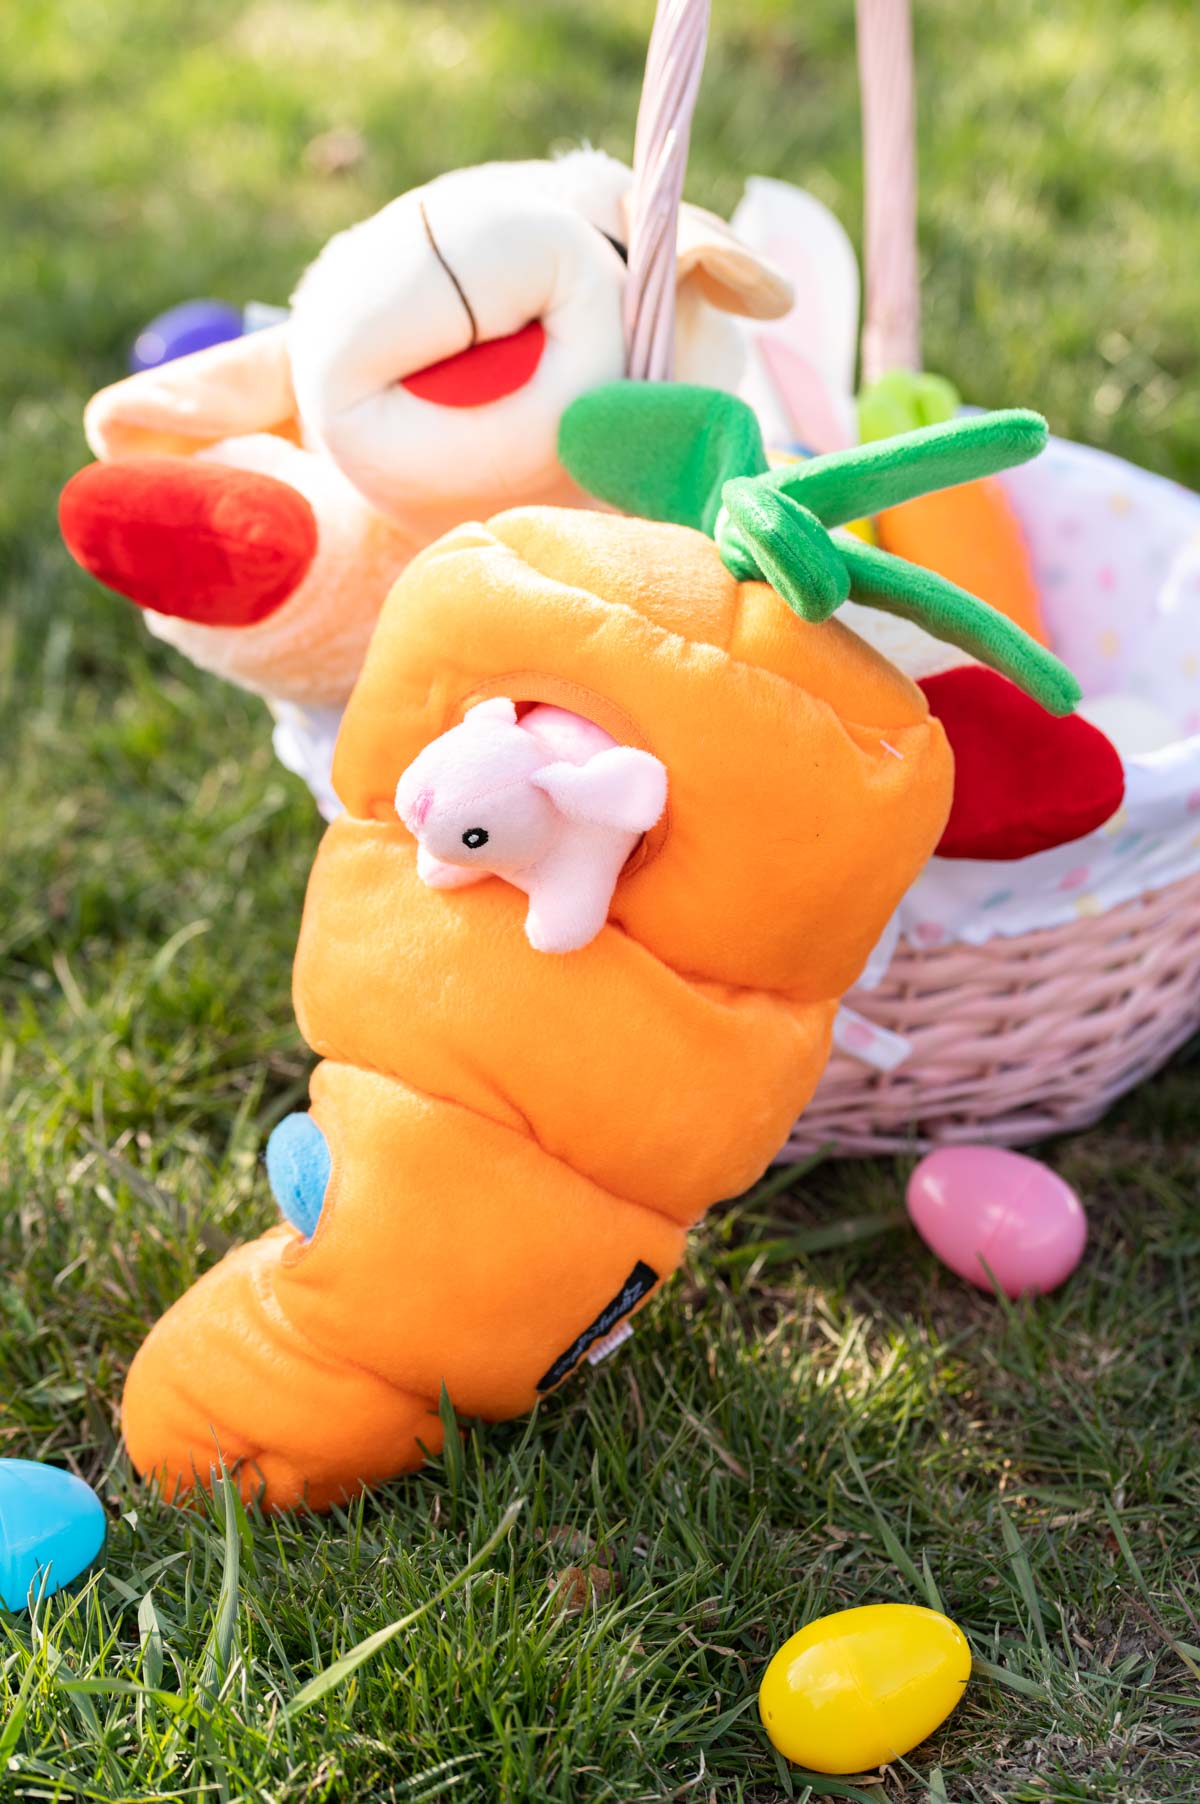 A hide and seek toy for dogs in the shape of a large carrot leans against an Easter basket on the grass